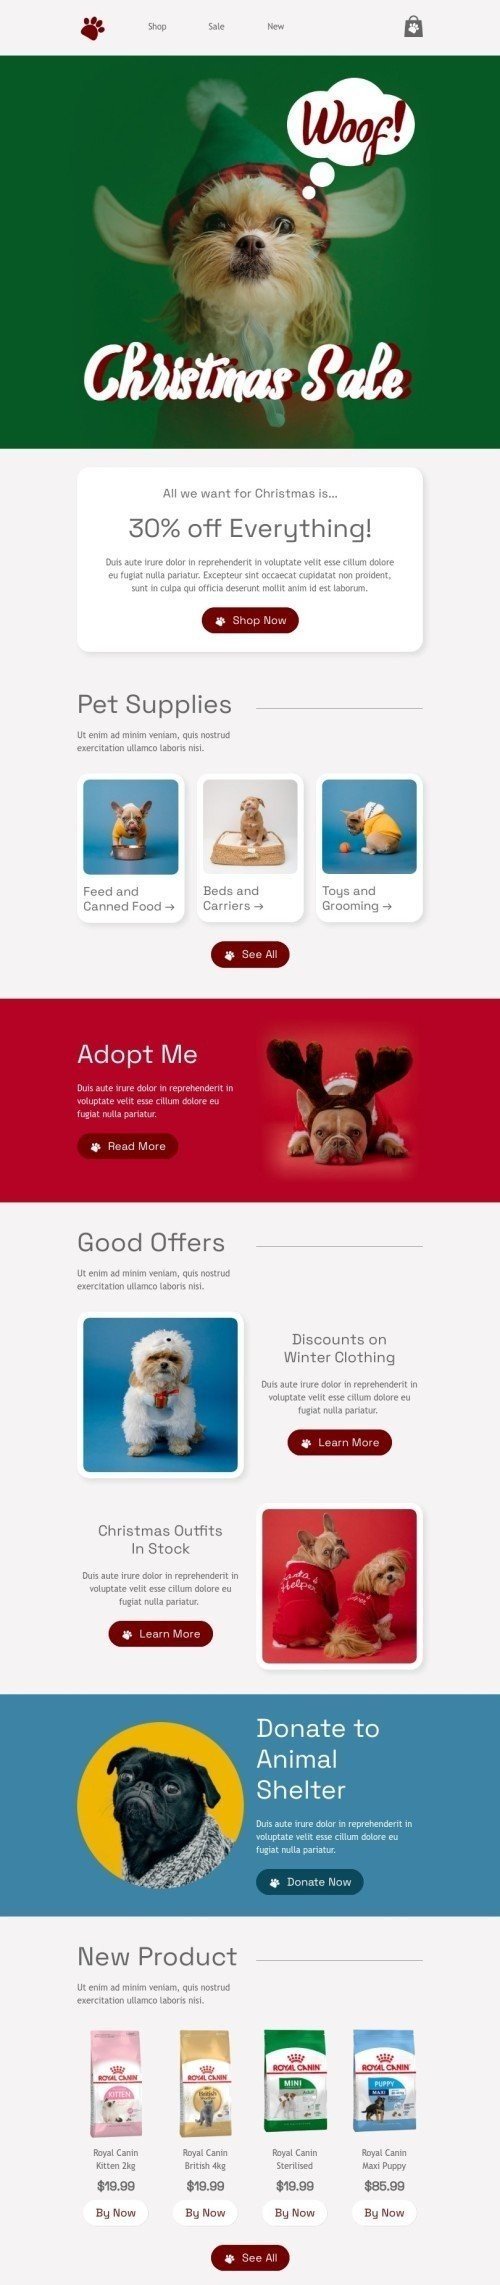 Christmas email template "All we want for Christmas is..." for pets industry mobile view